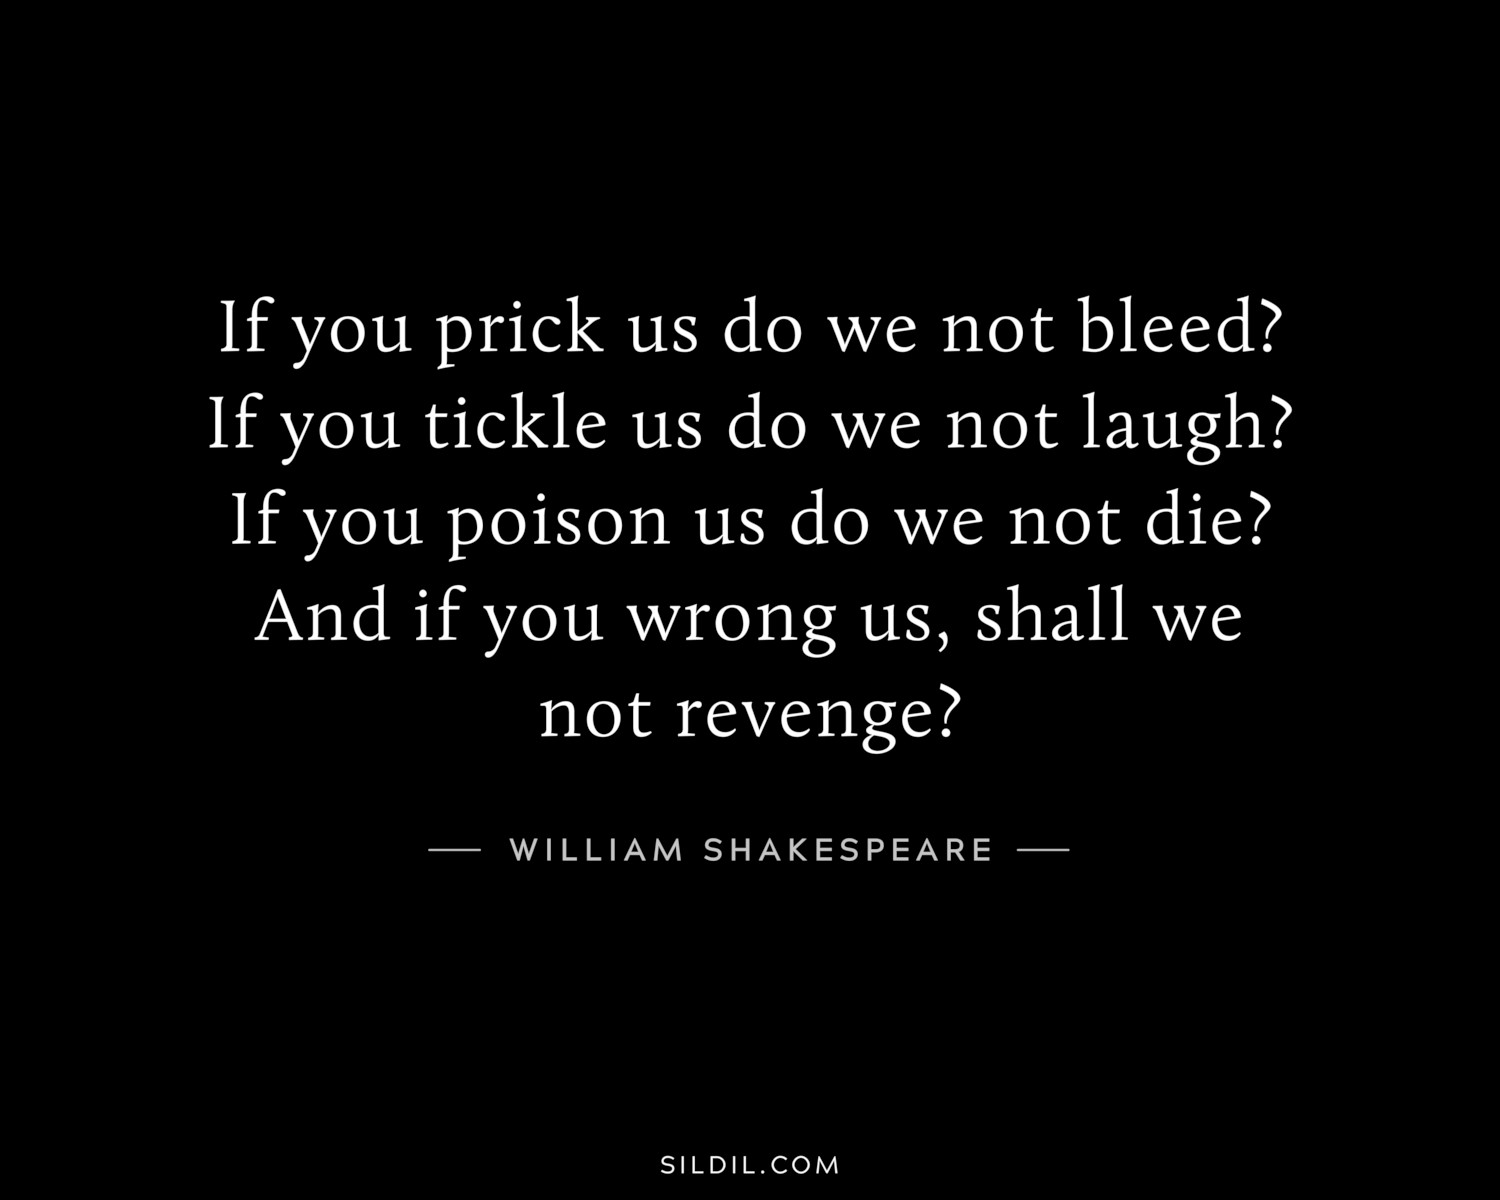 If you prick us do we not bleed? If you tickle us do we not laugh? If you poison us do we not die? And if you wrong us, shall we not revenge?